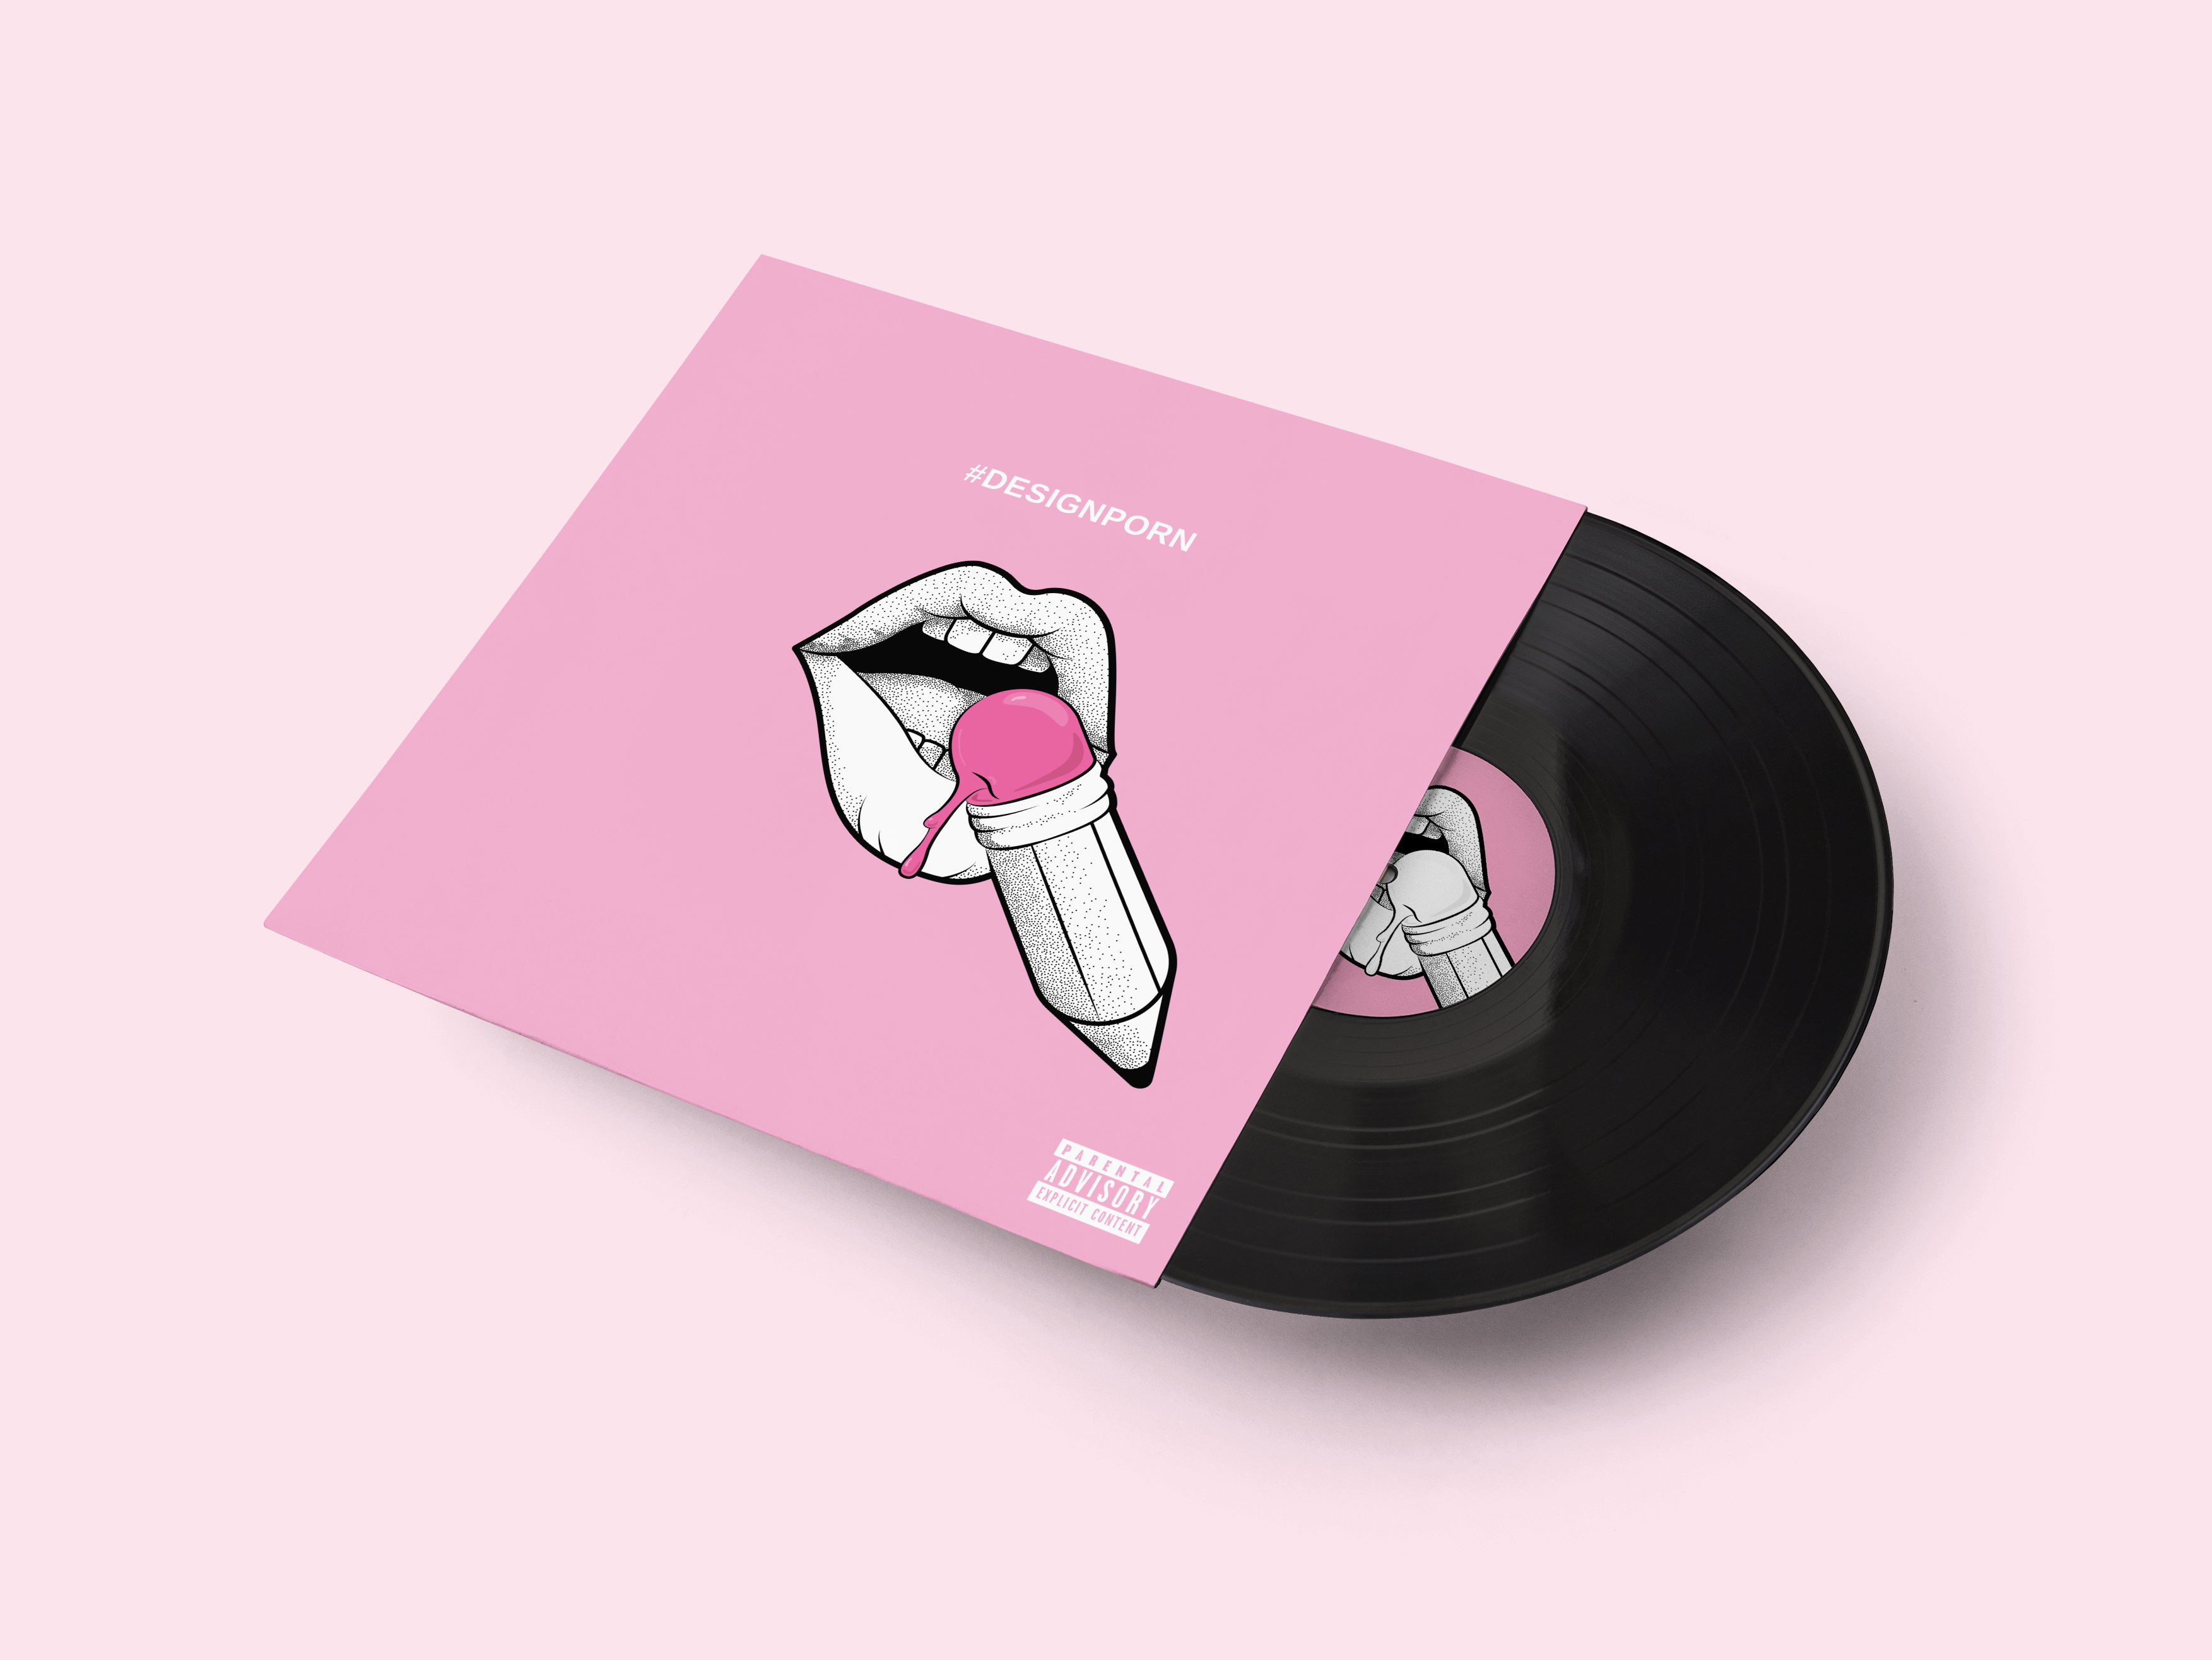 Dribbble - 387-vinyl-record-mockup_1_2x.png by malik fouque